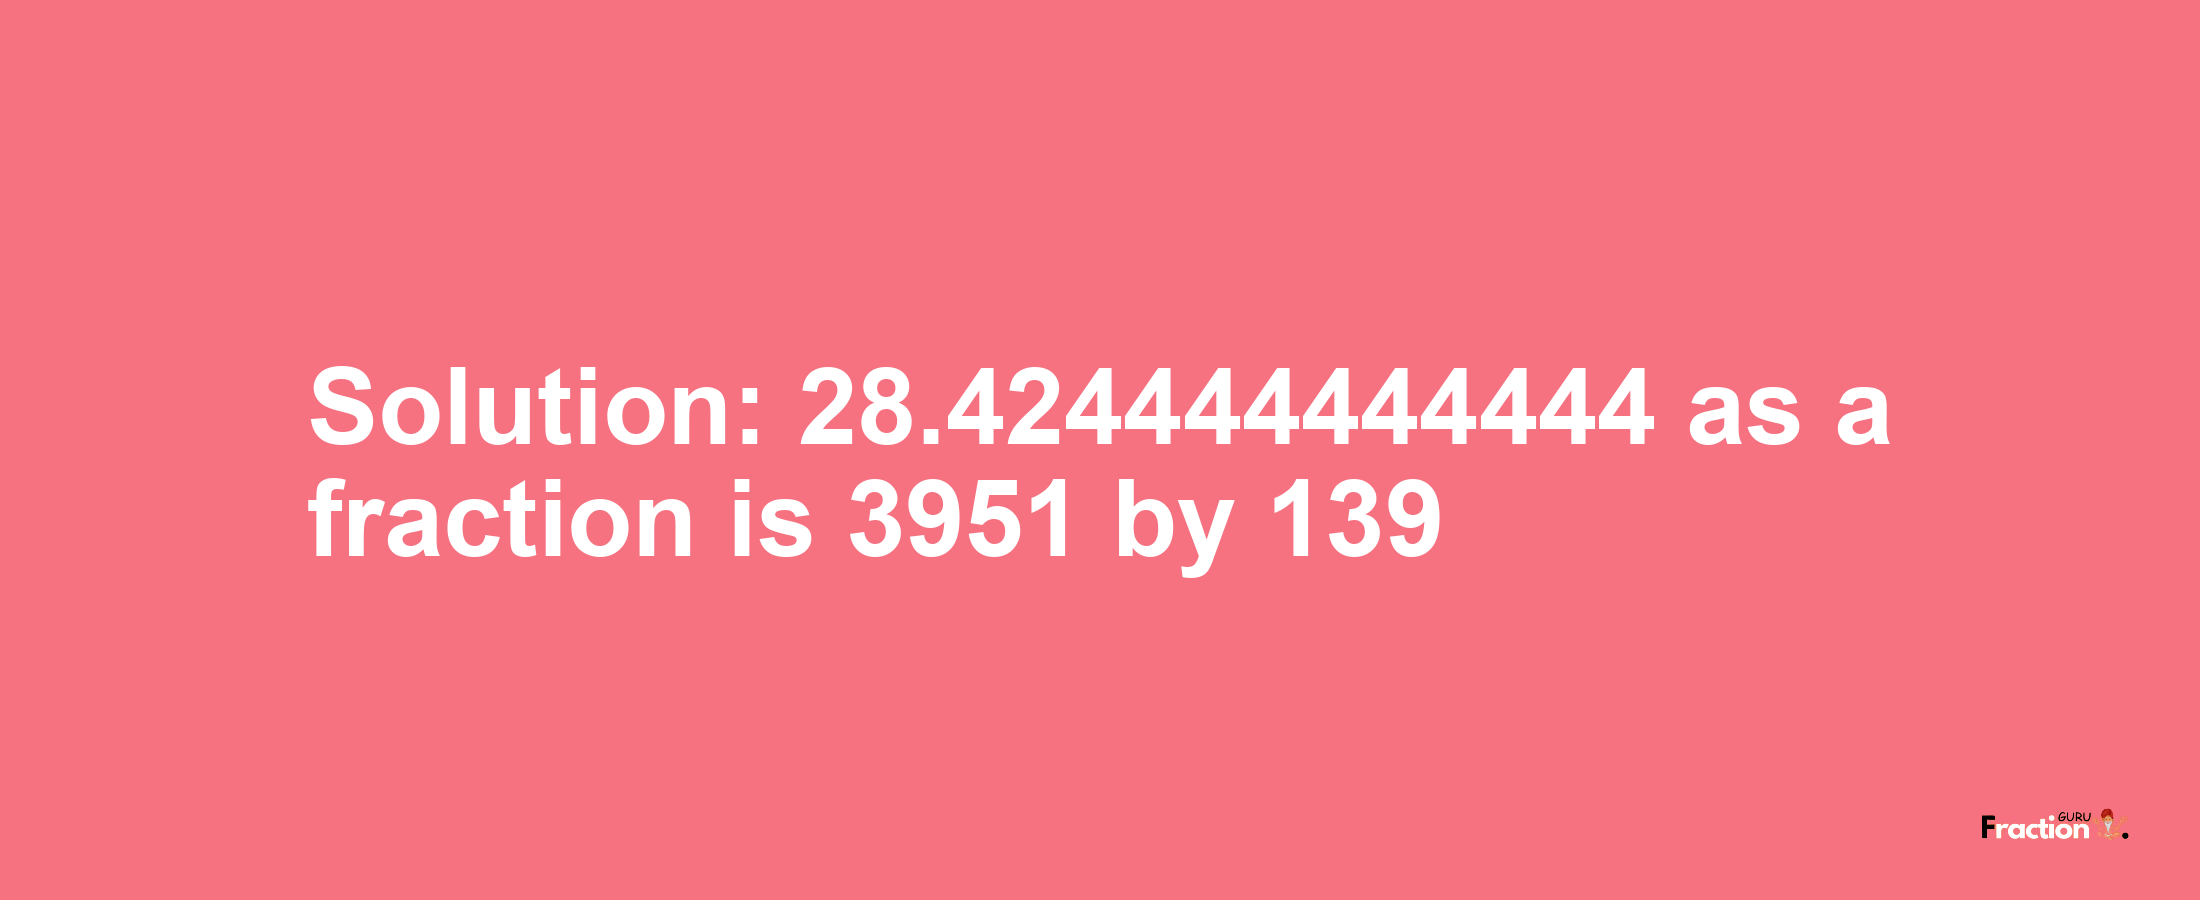 Solution:28.424444444444 as a fraction is 3951/139